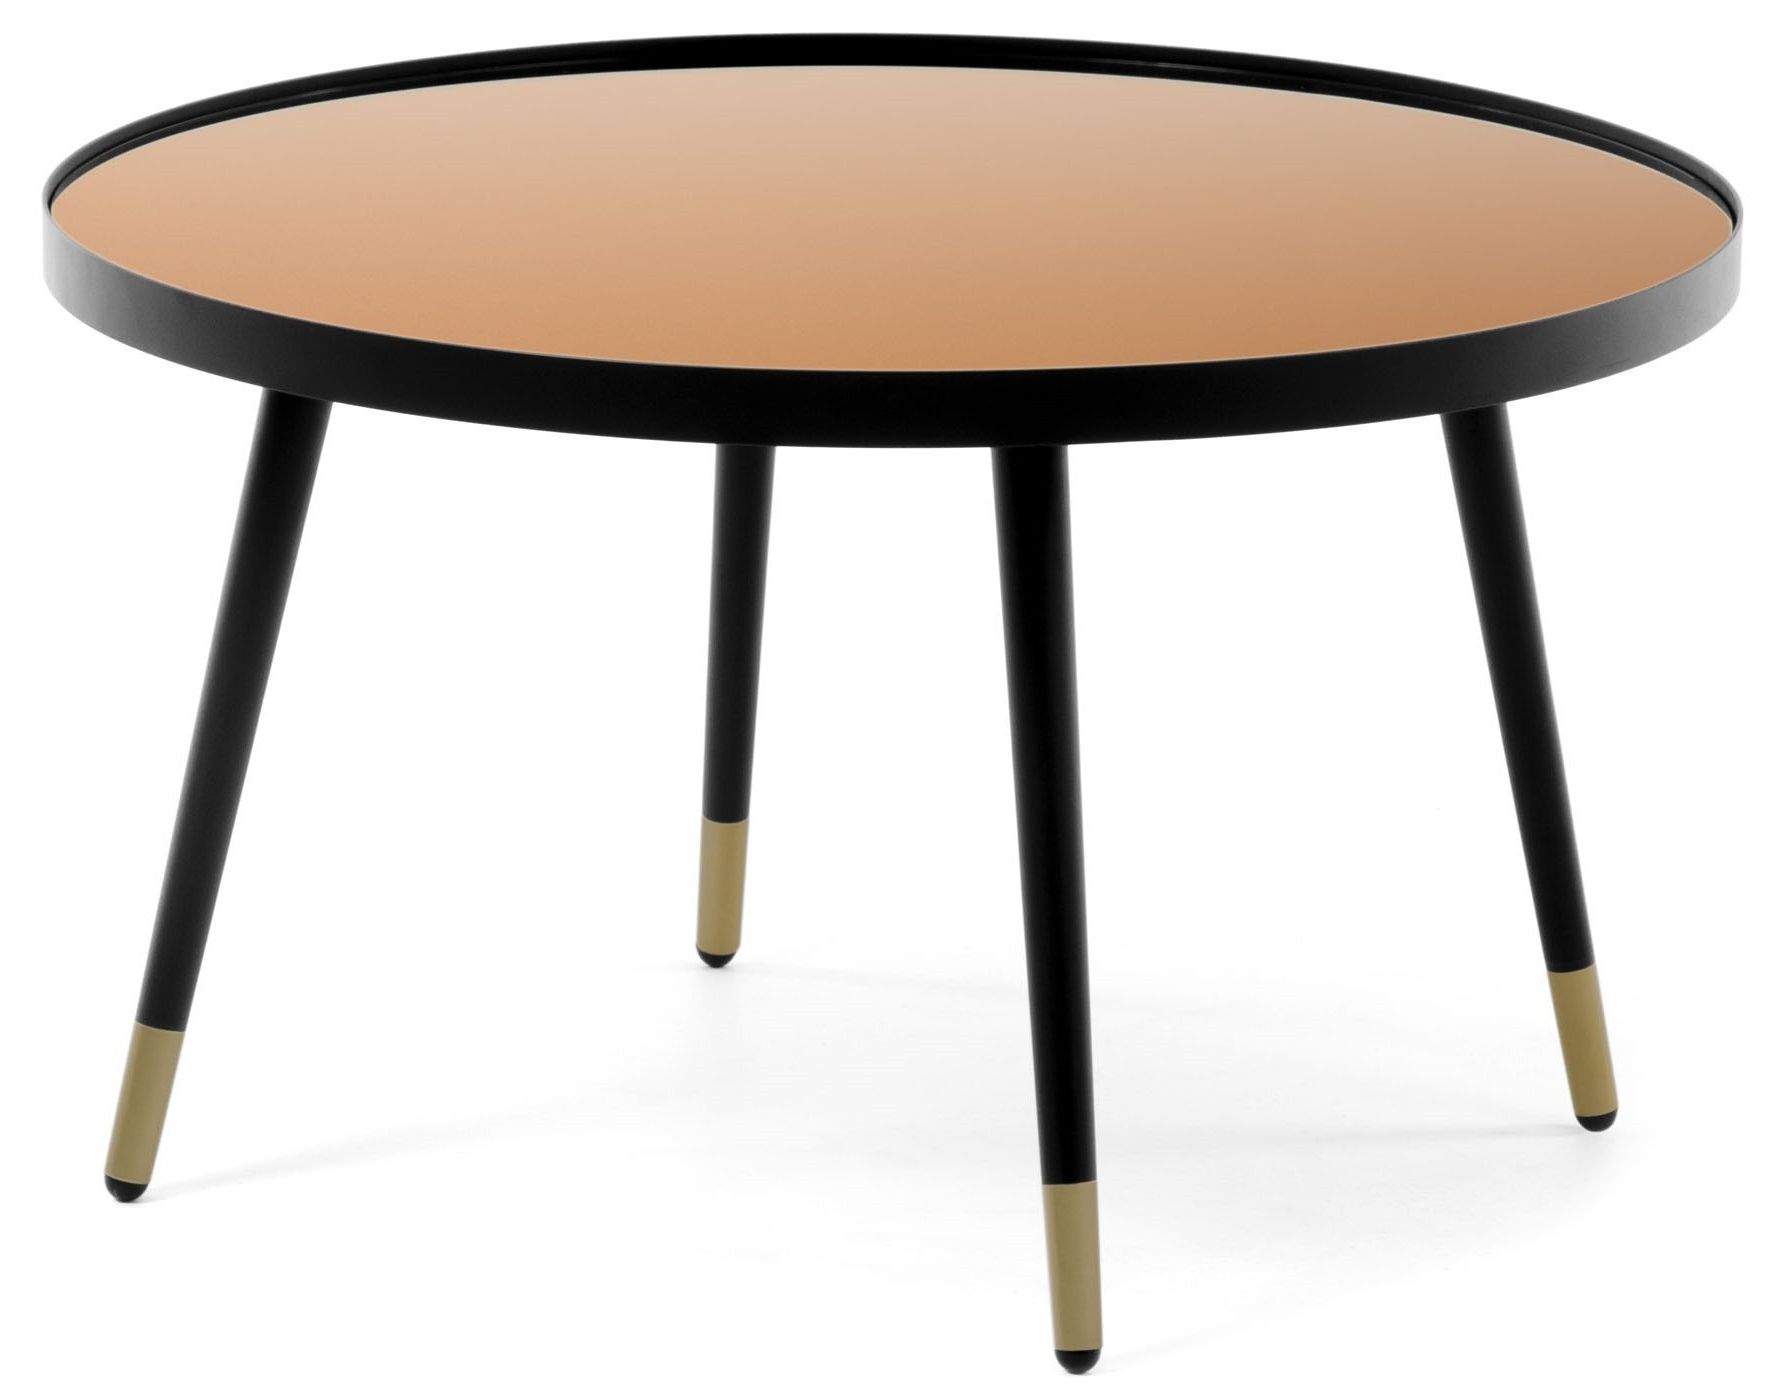 Preferred Tempered Glass Top Coffee Tables Inside Daila Diam 80 Cm Round In Metal And Tempered Glass Top Home Design Coffee  Table (View 2 of 20)